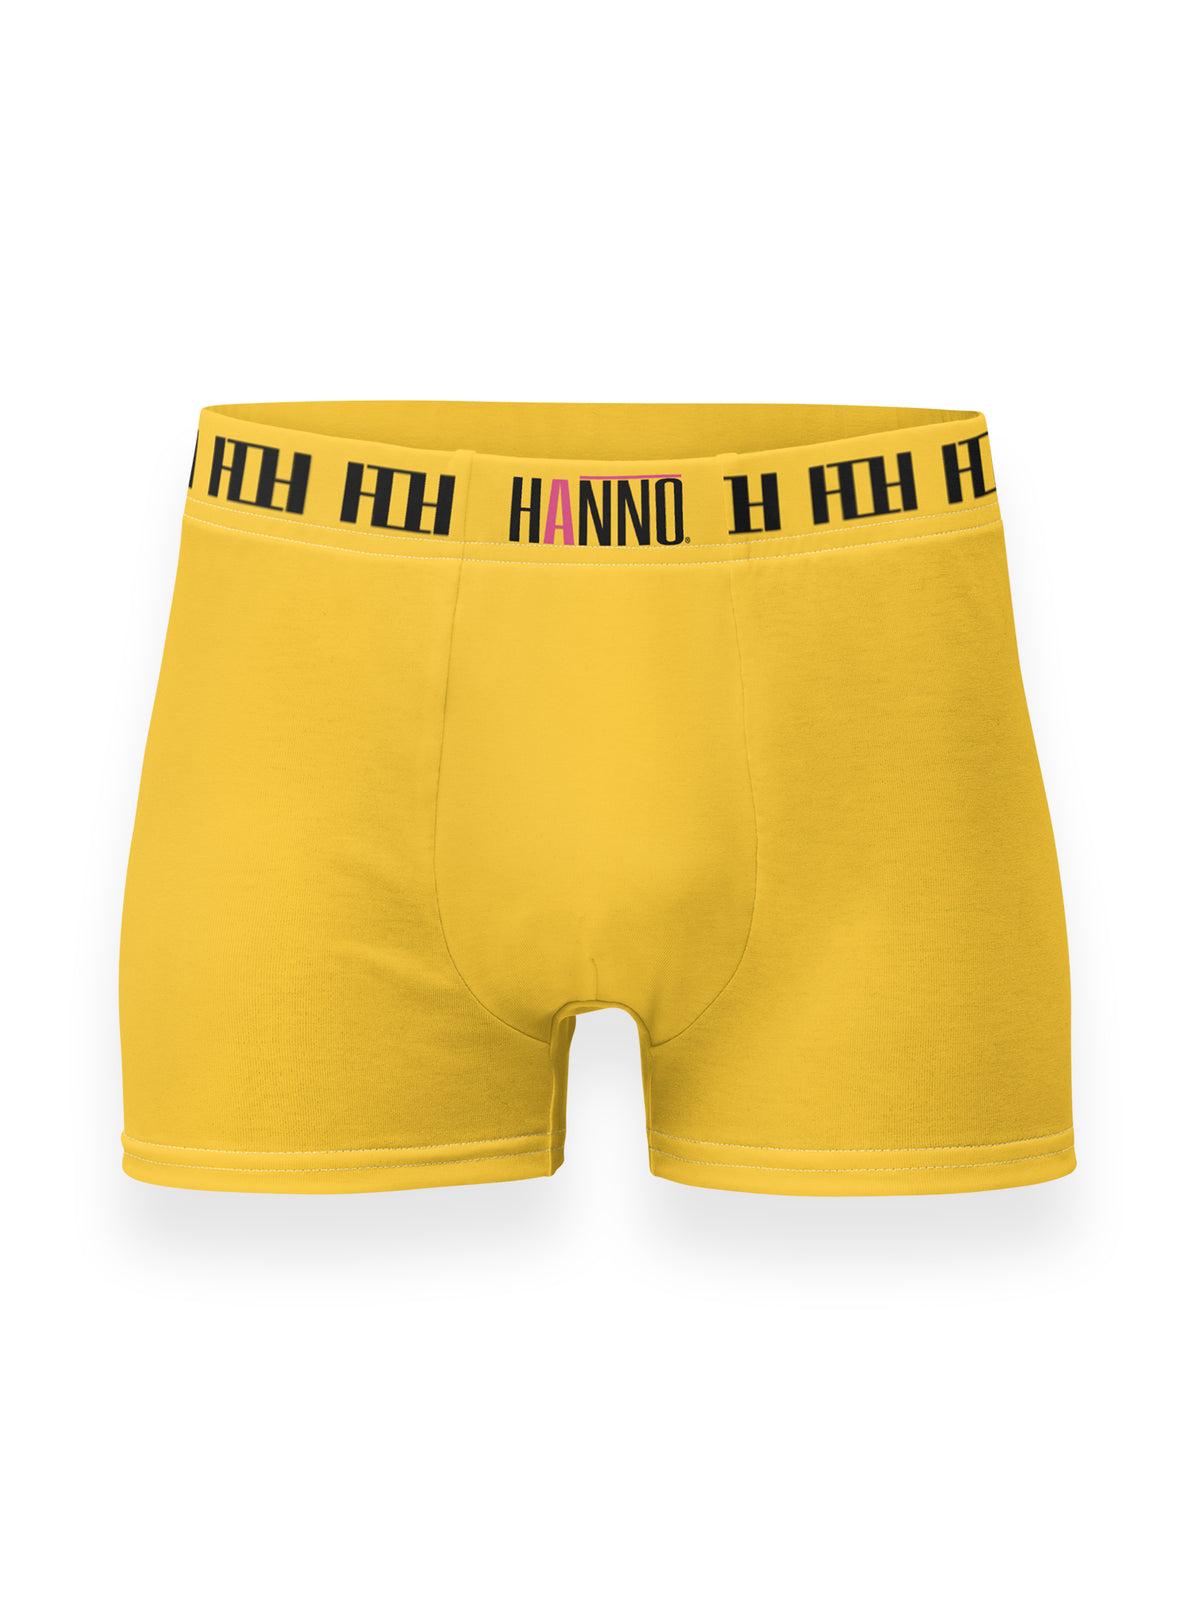 Unisex Boxer Briefs Yellow and black